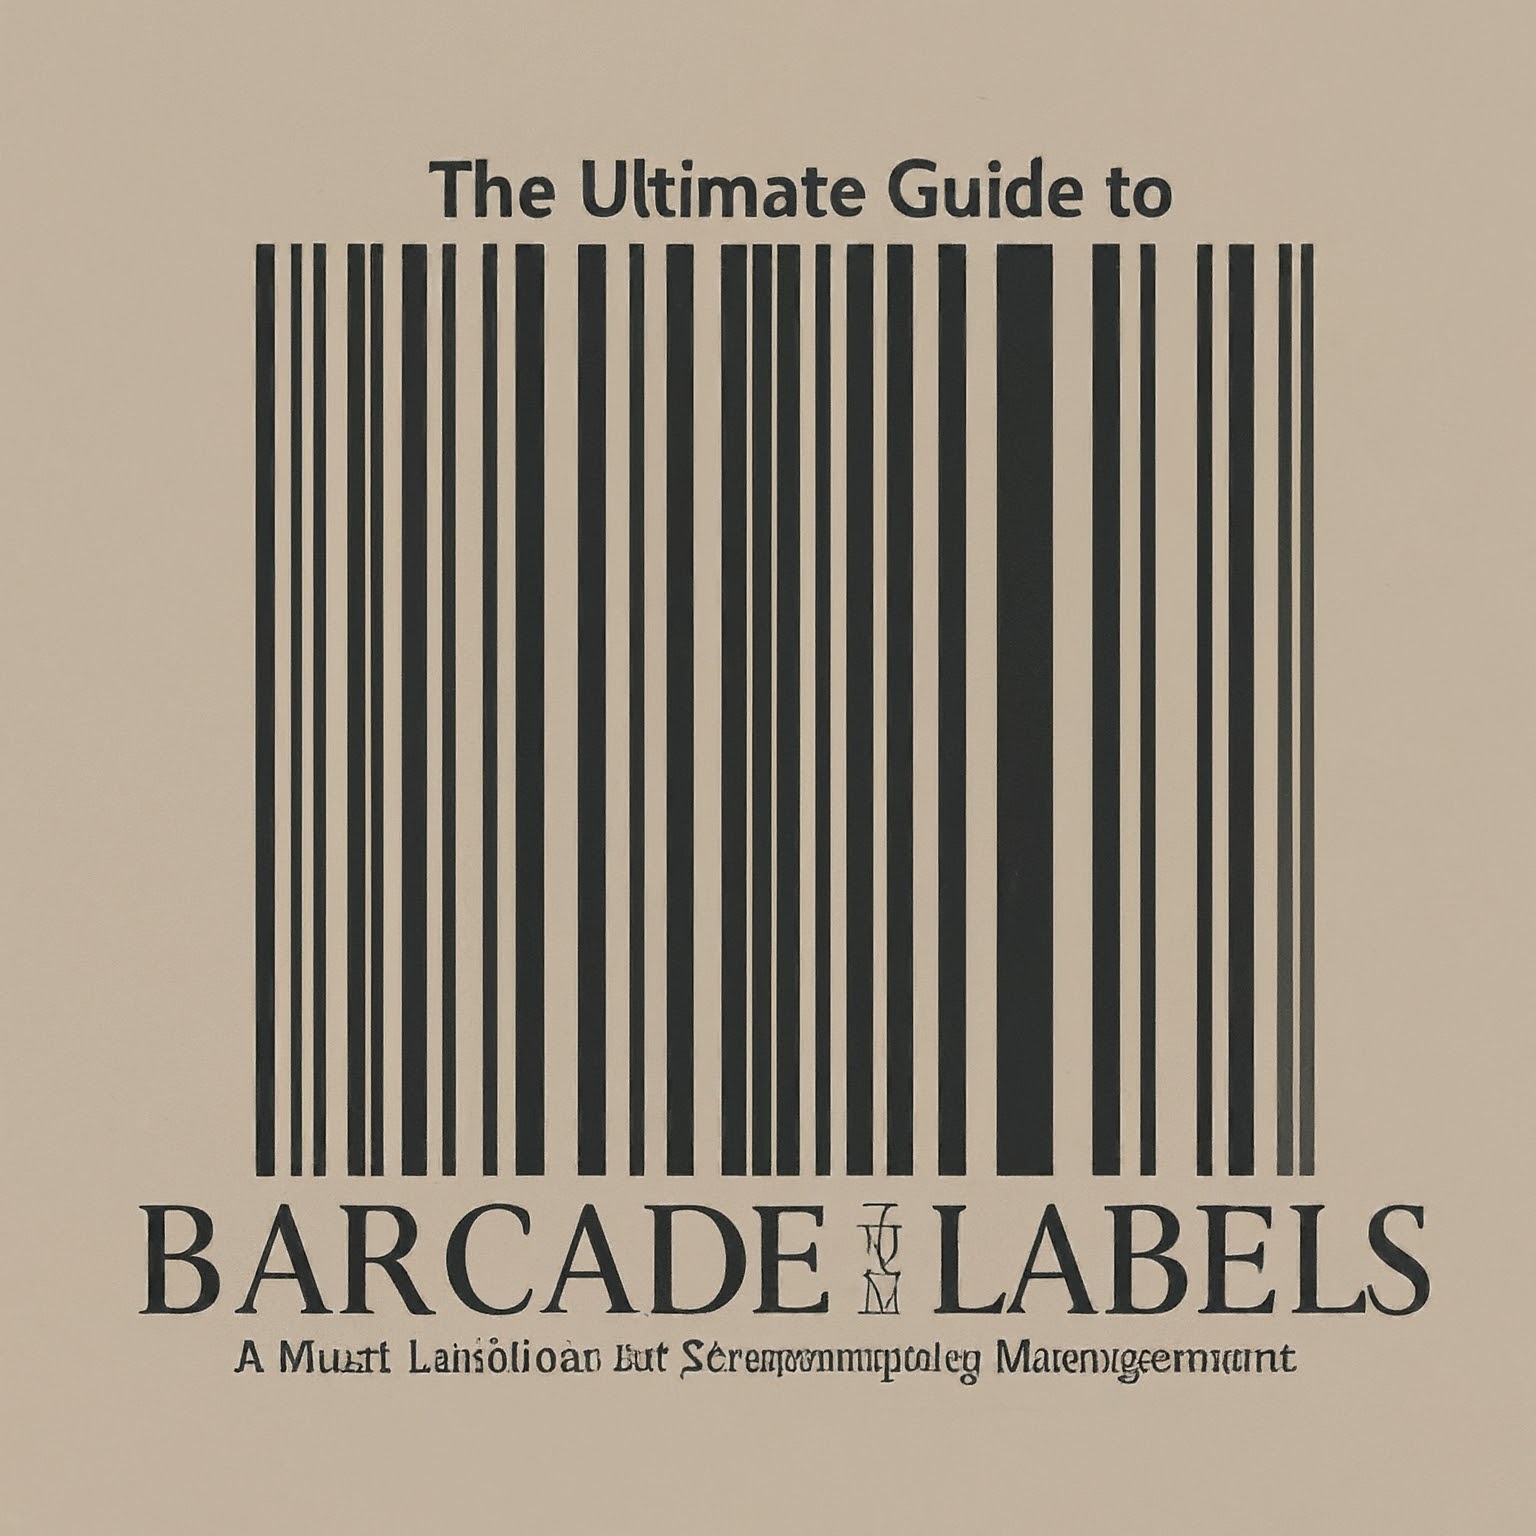 The Essential Guide to Purchasing Barcode Labels for Clothing